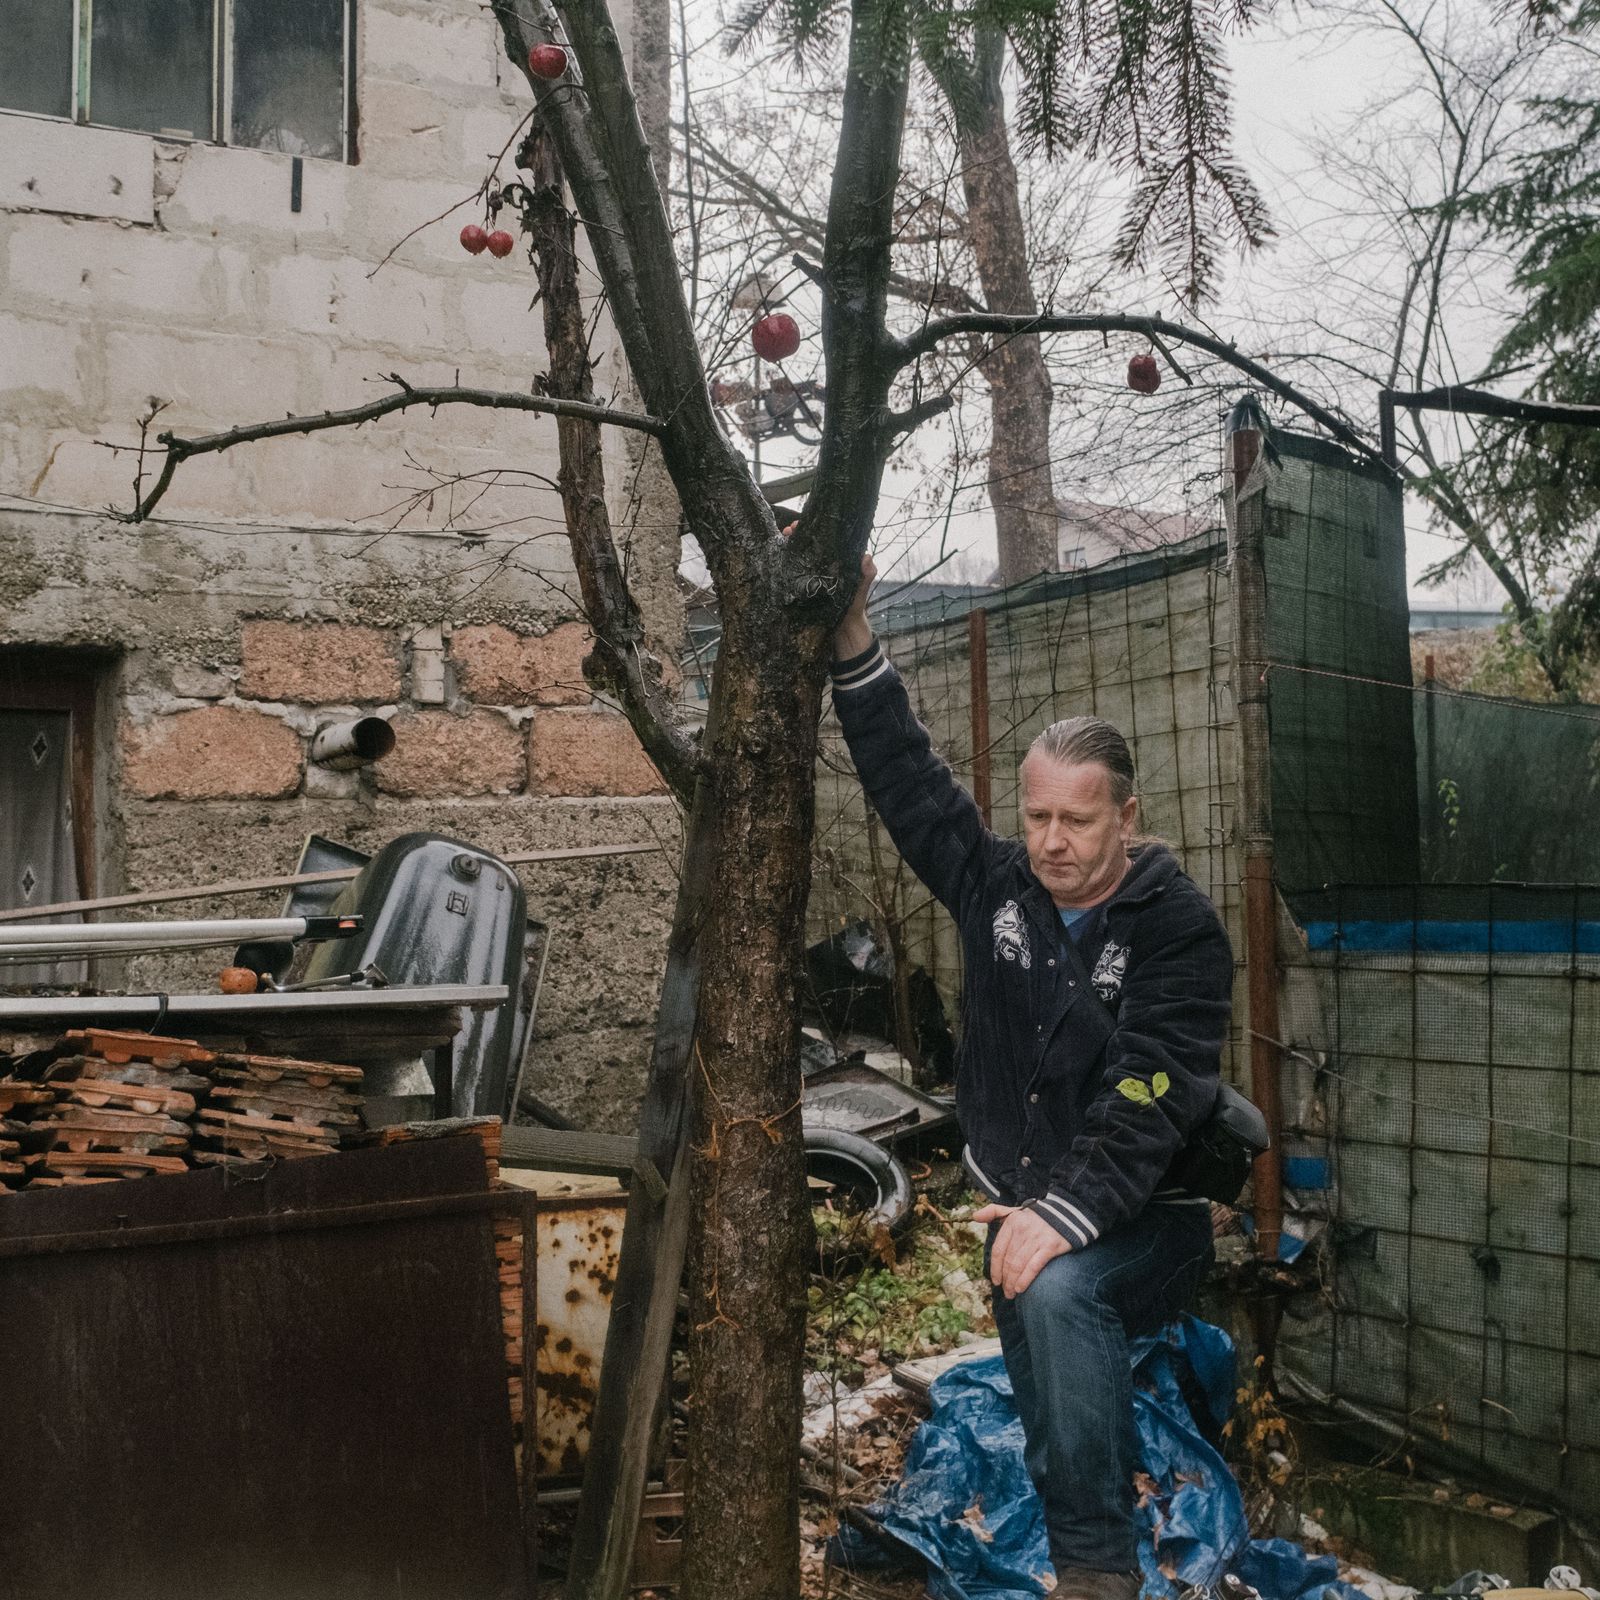 © Thomas Morsch Magnus Terhorst - Senad is not going to eat the apples from his garden because of the pollution